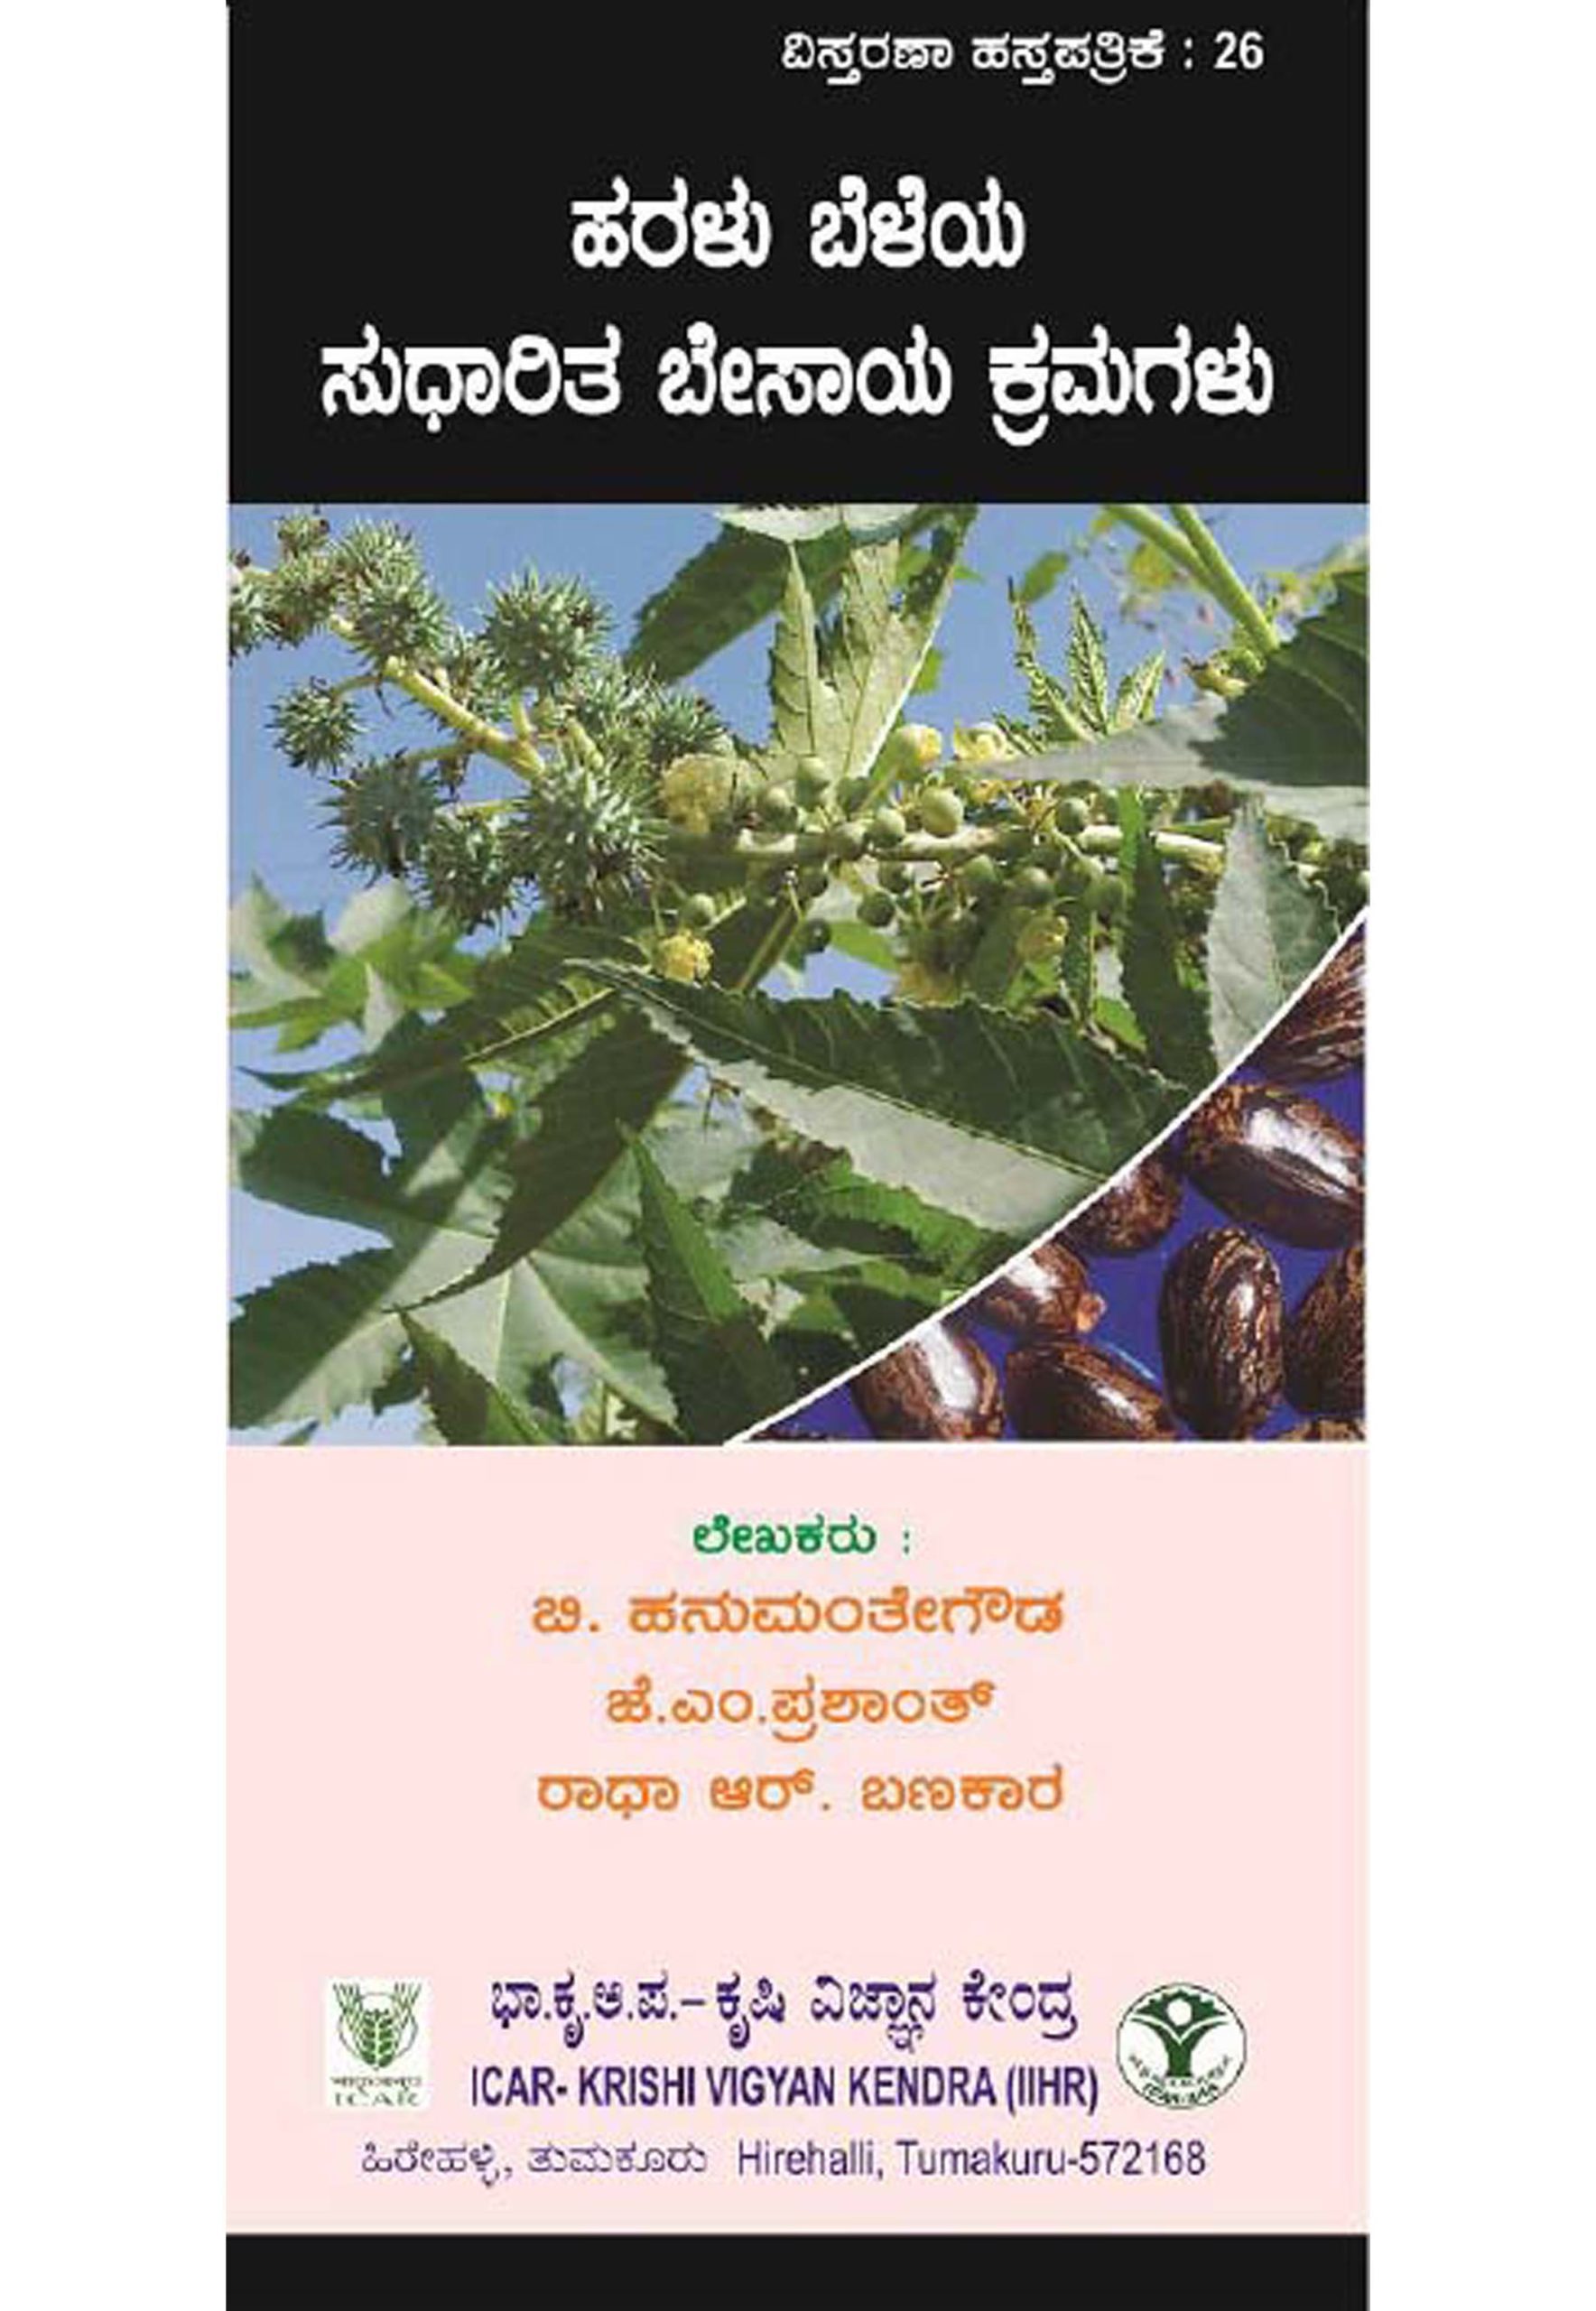 Improved cultivation practices of Castor